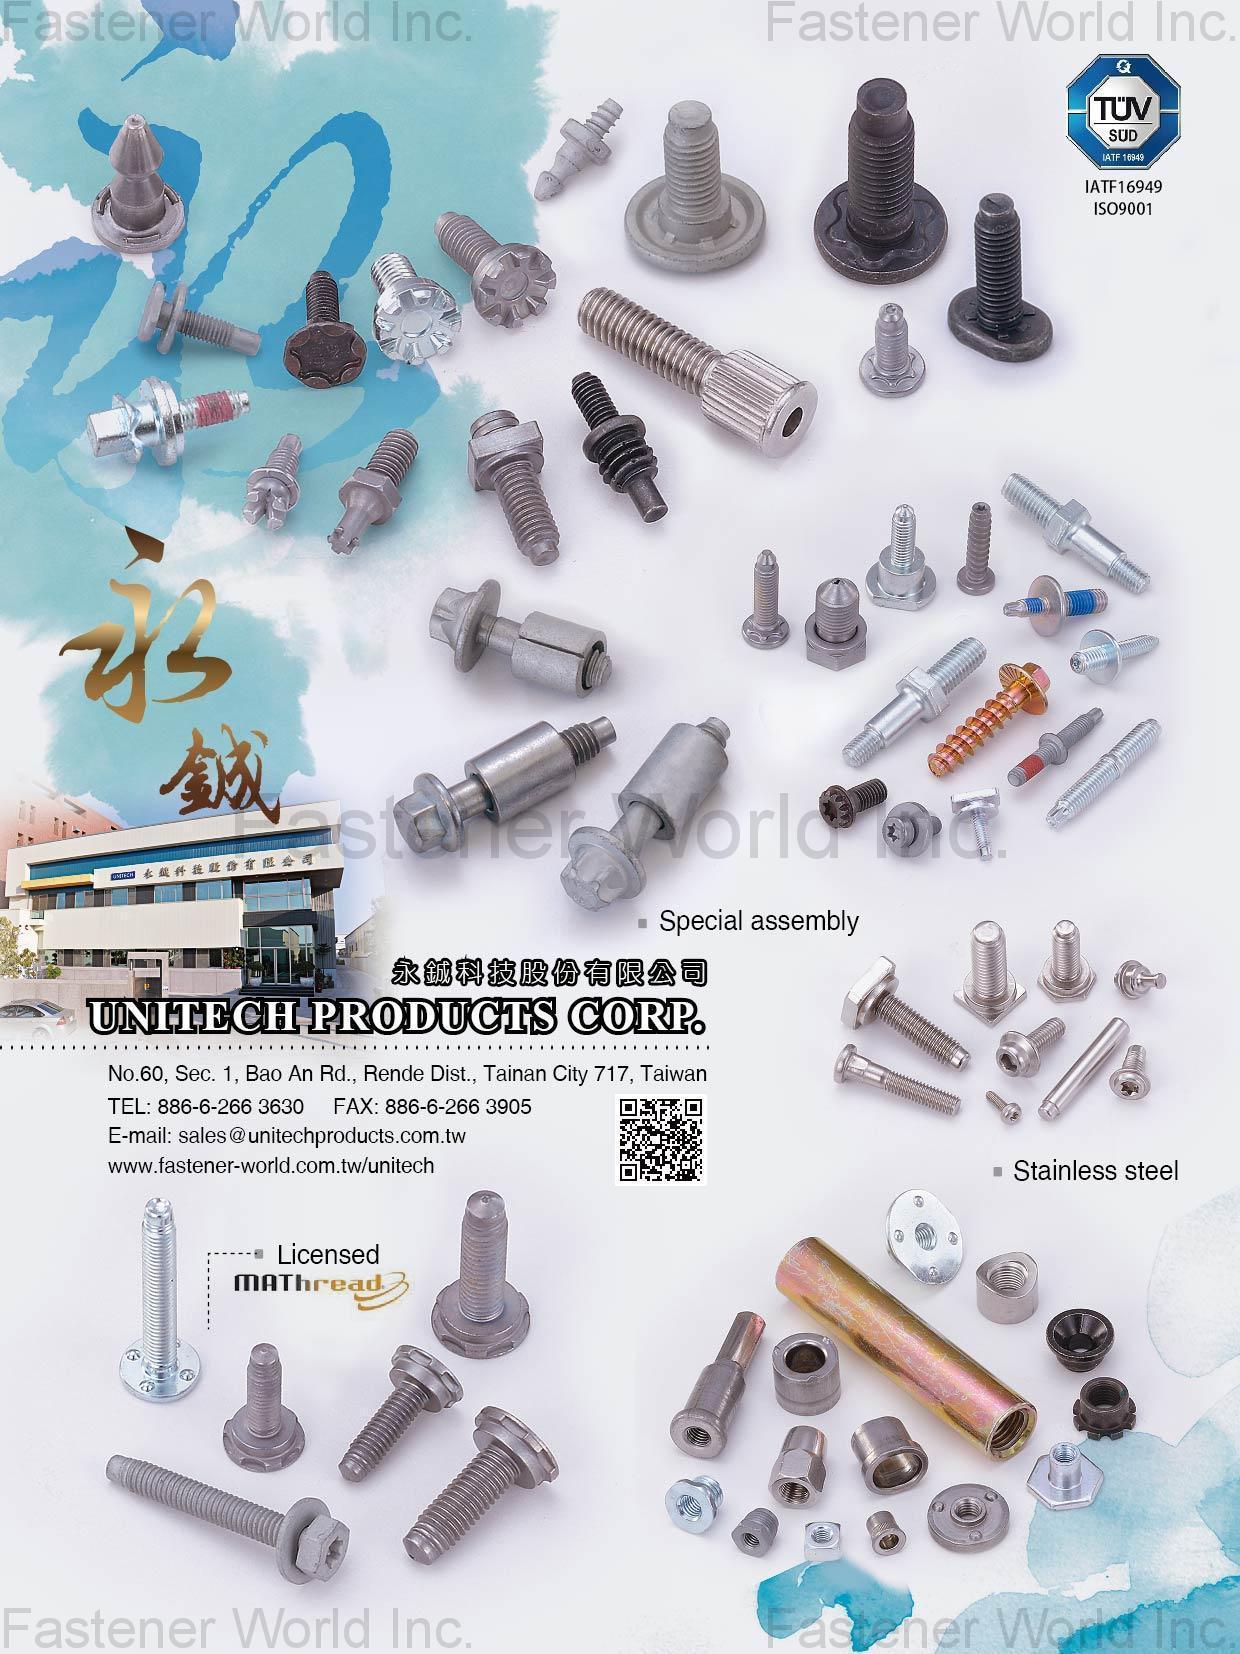 SPEC PRODUCTS CORP.-Unitech Factory , MAThread, Special Fasteners, Automotive Fasteners , Stainless Steel Bolts